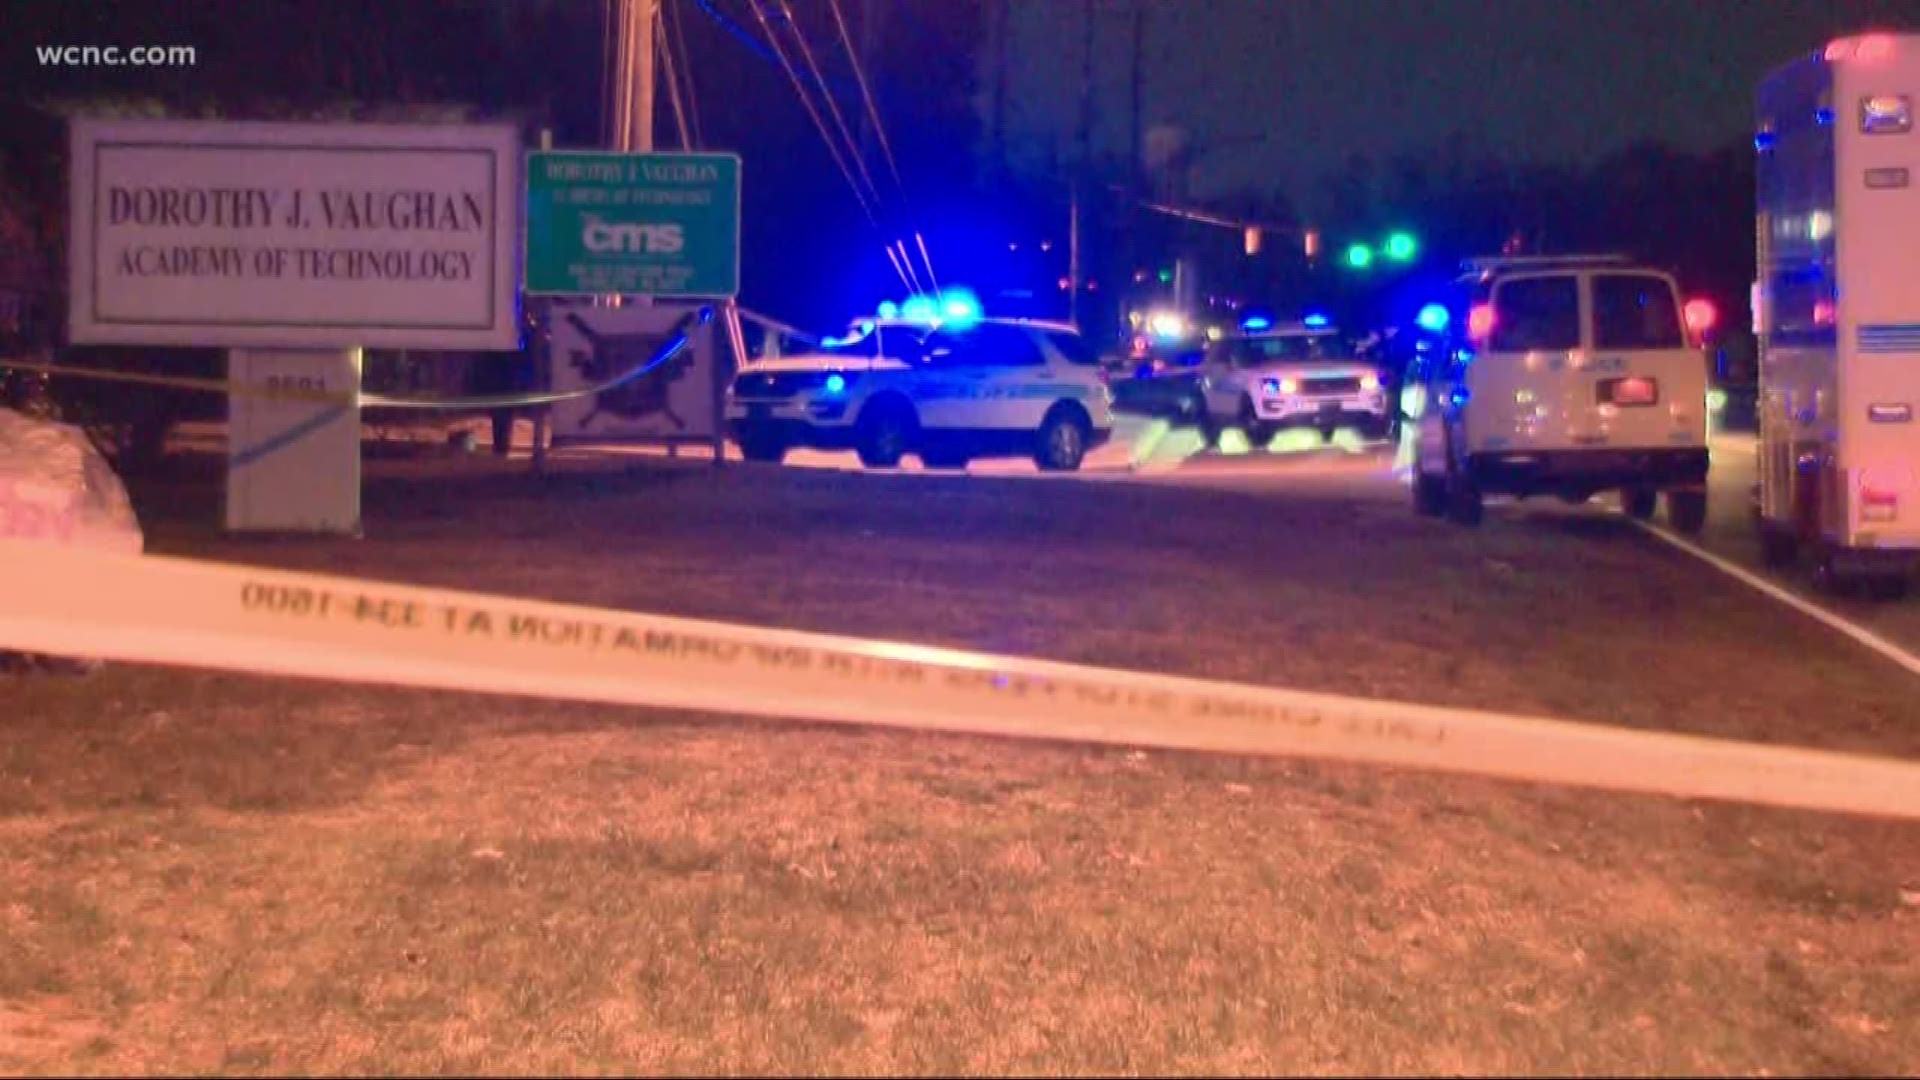 No arrests have been made after a shooting left one Uber passenger dead and injured a second.